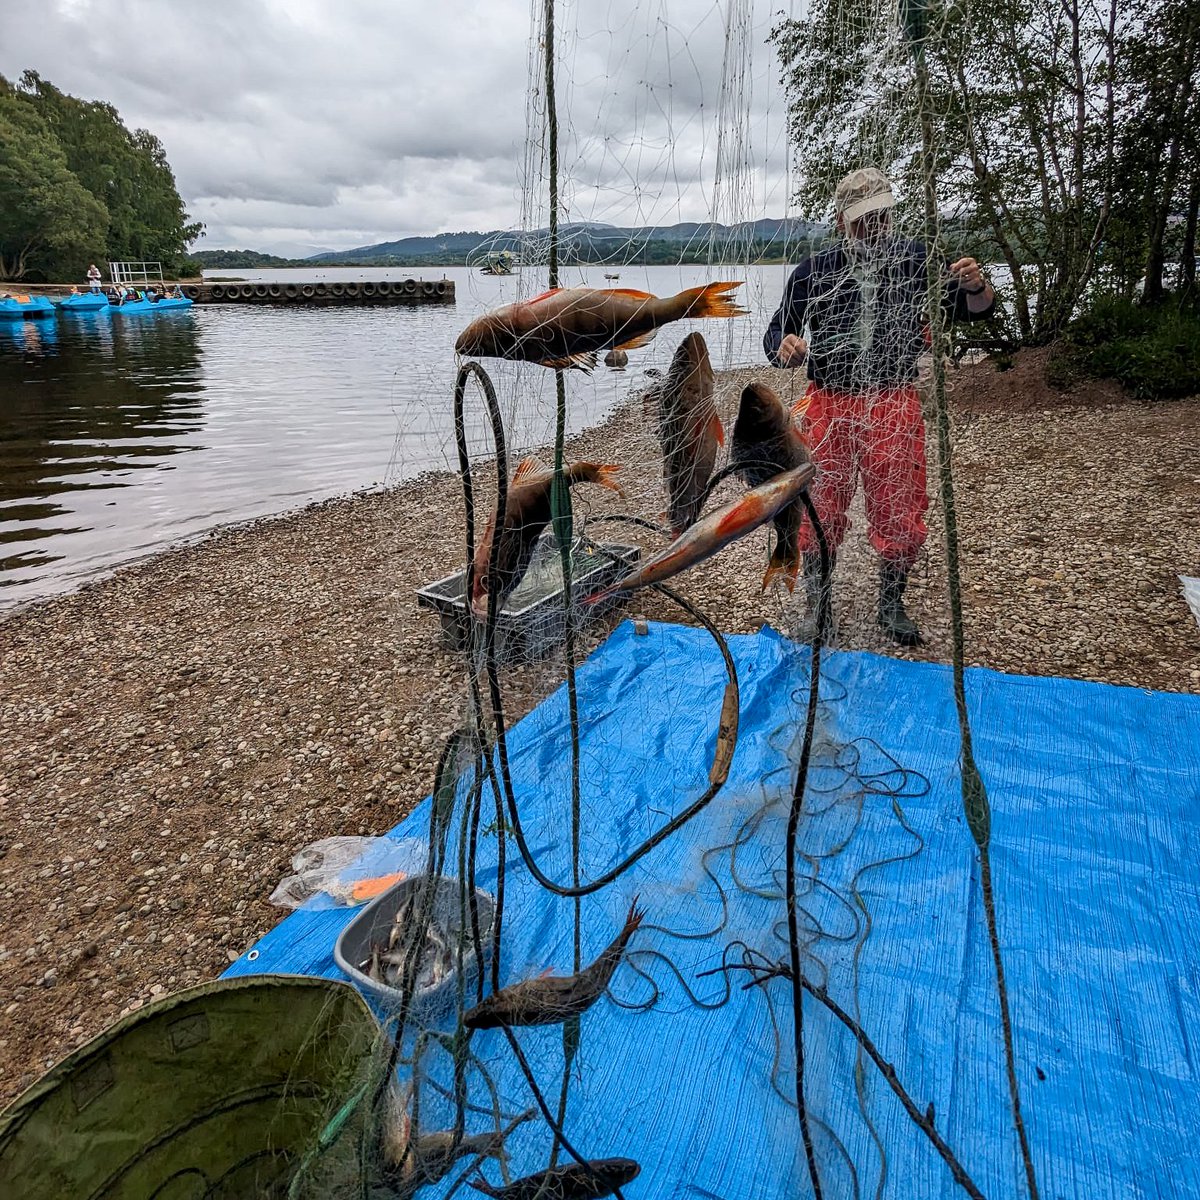 This week we have been conducting a netting survey, to investigate reports of non-native Perch in Loch Insh. 

Unfortunately, our team have found Perch.

This finding is a concern as this will put increased pressure on our iconic Atlantic Salmon & Sea Trout.

#WildSalmonFirst